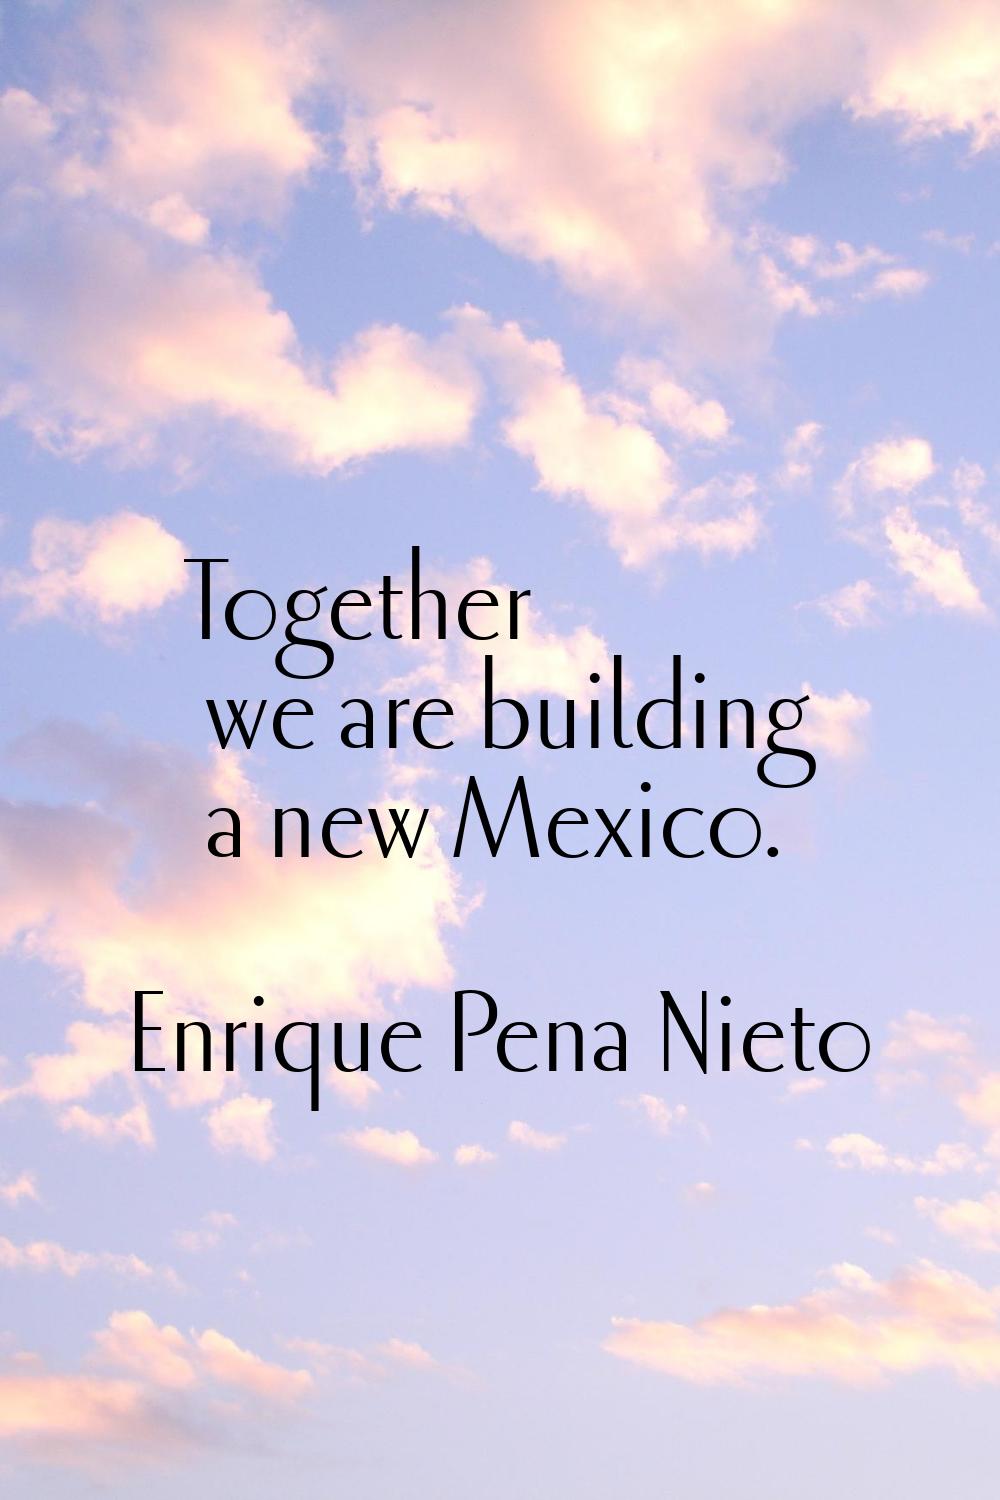 Together we are building a new Mexico.